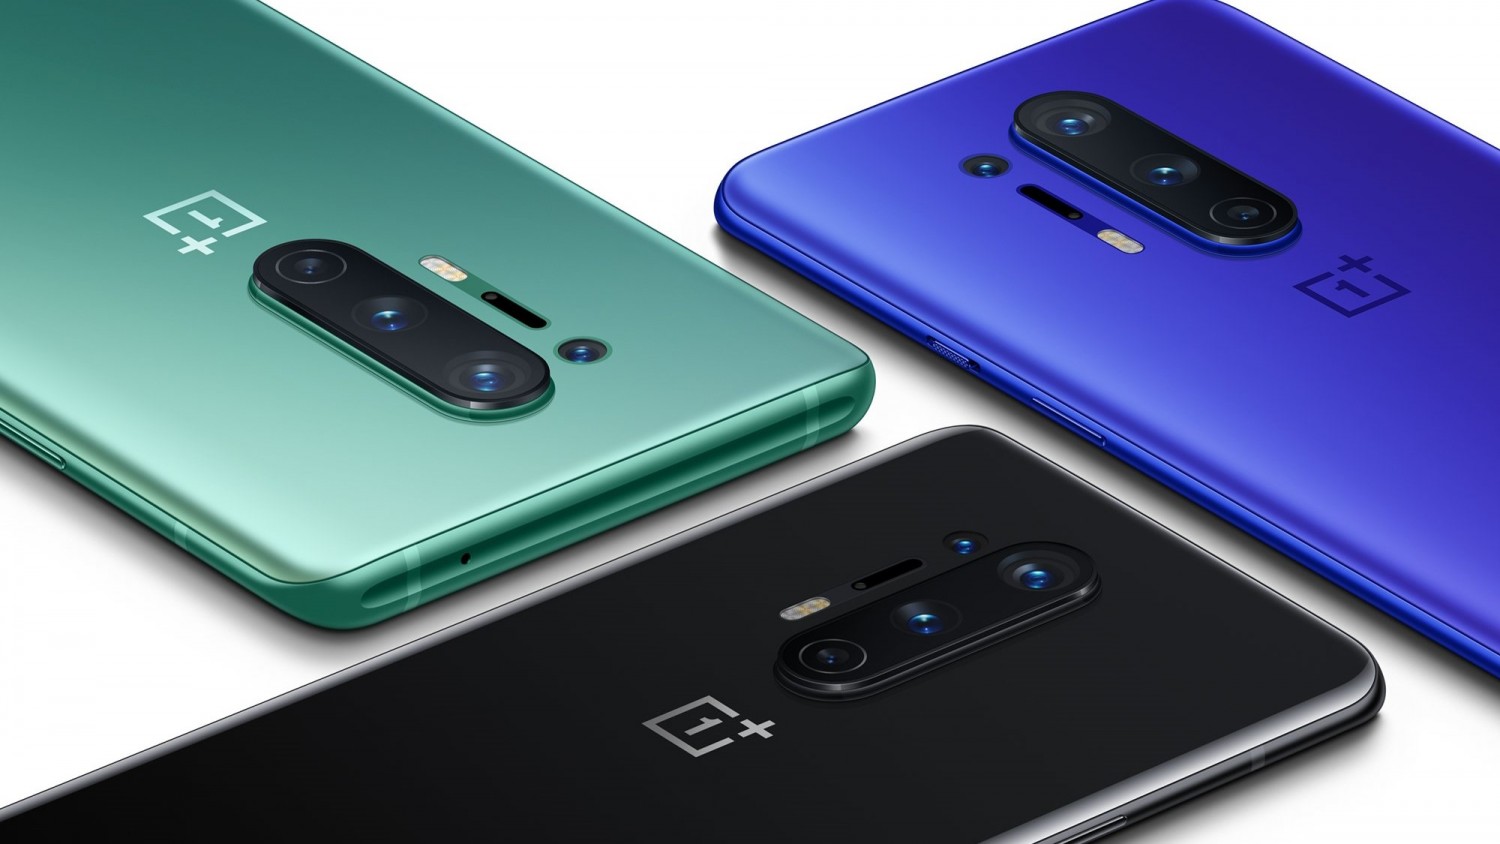 OnePlus is looking for volunteers to test Android 12 on OnePlus 8, 8 Pro and 8T smartphones and promises gifts for doing so